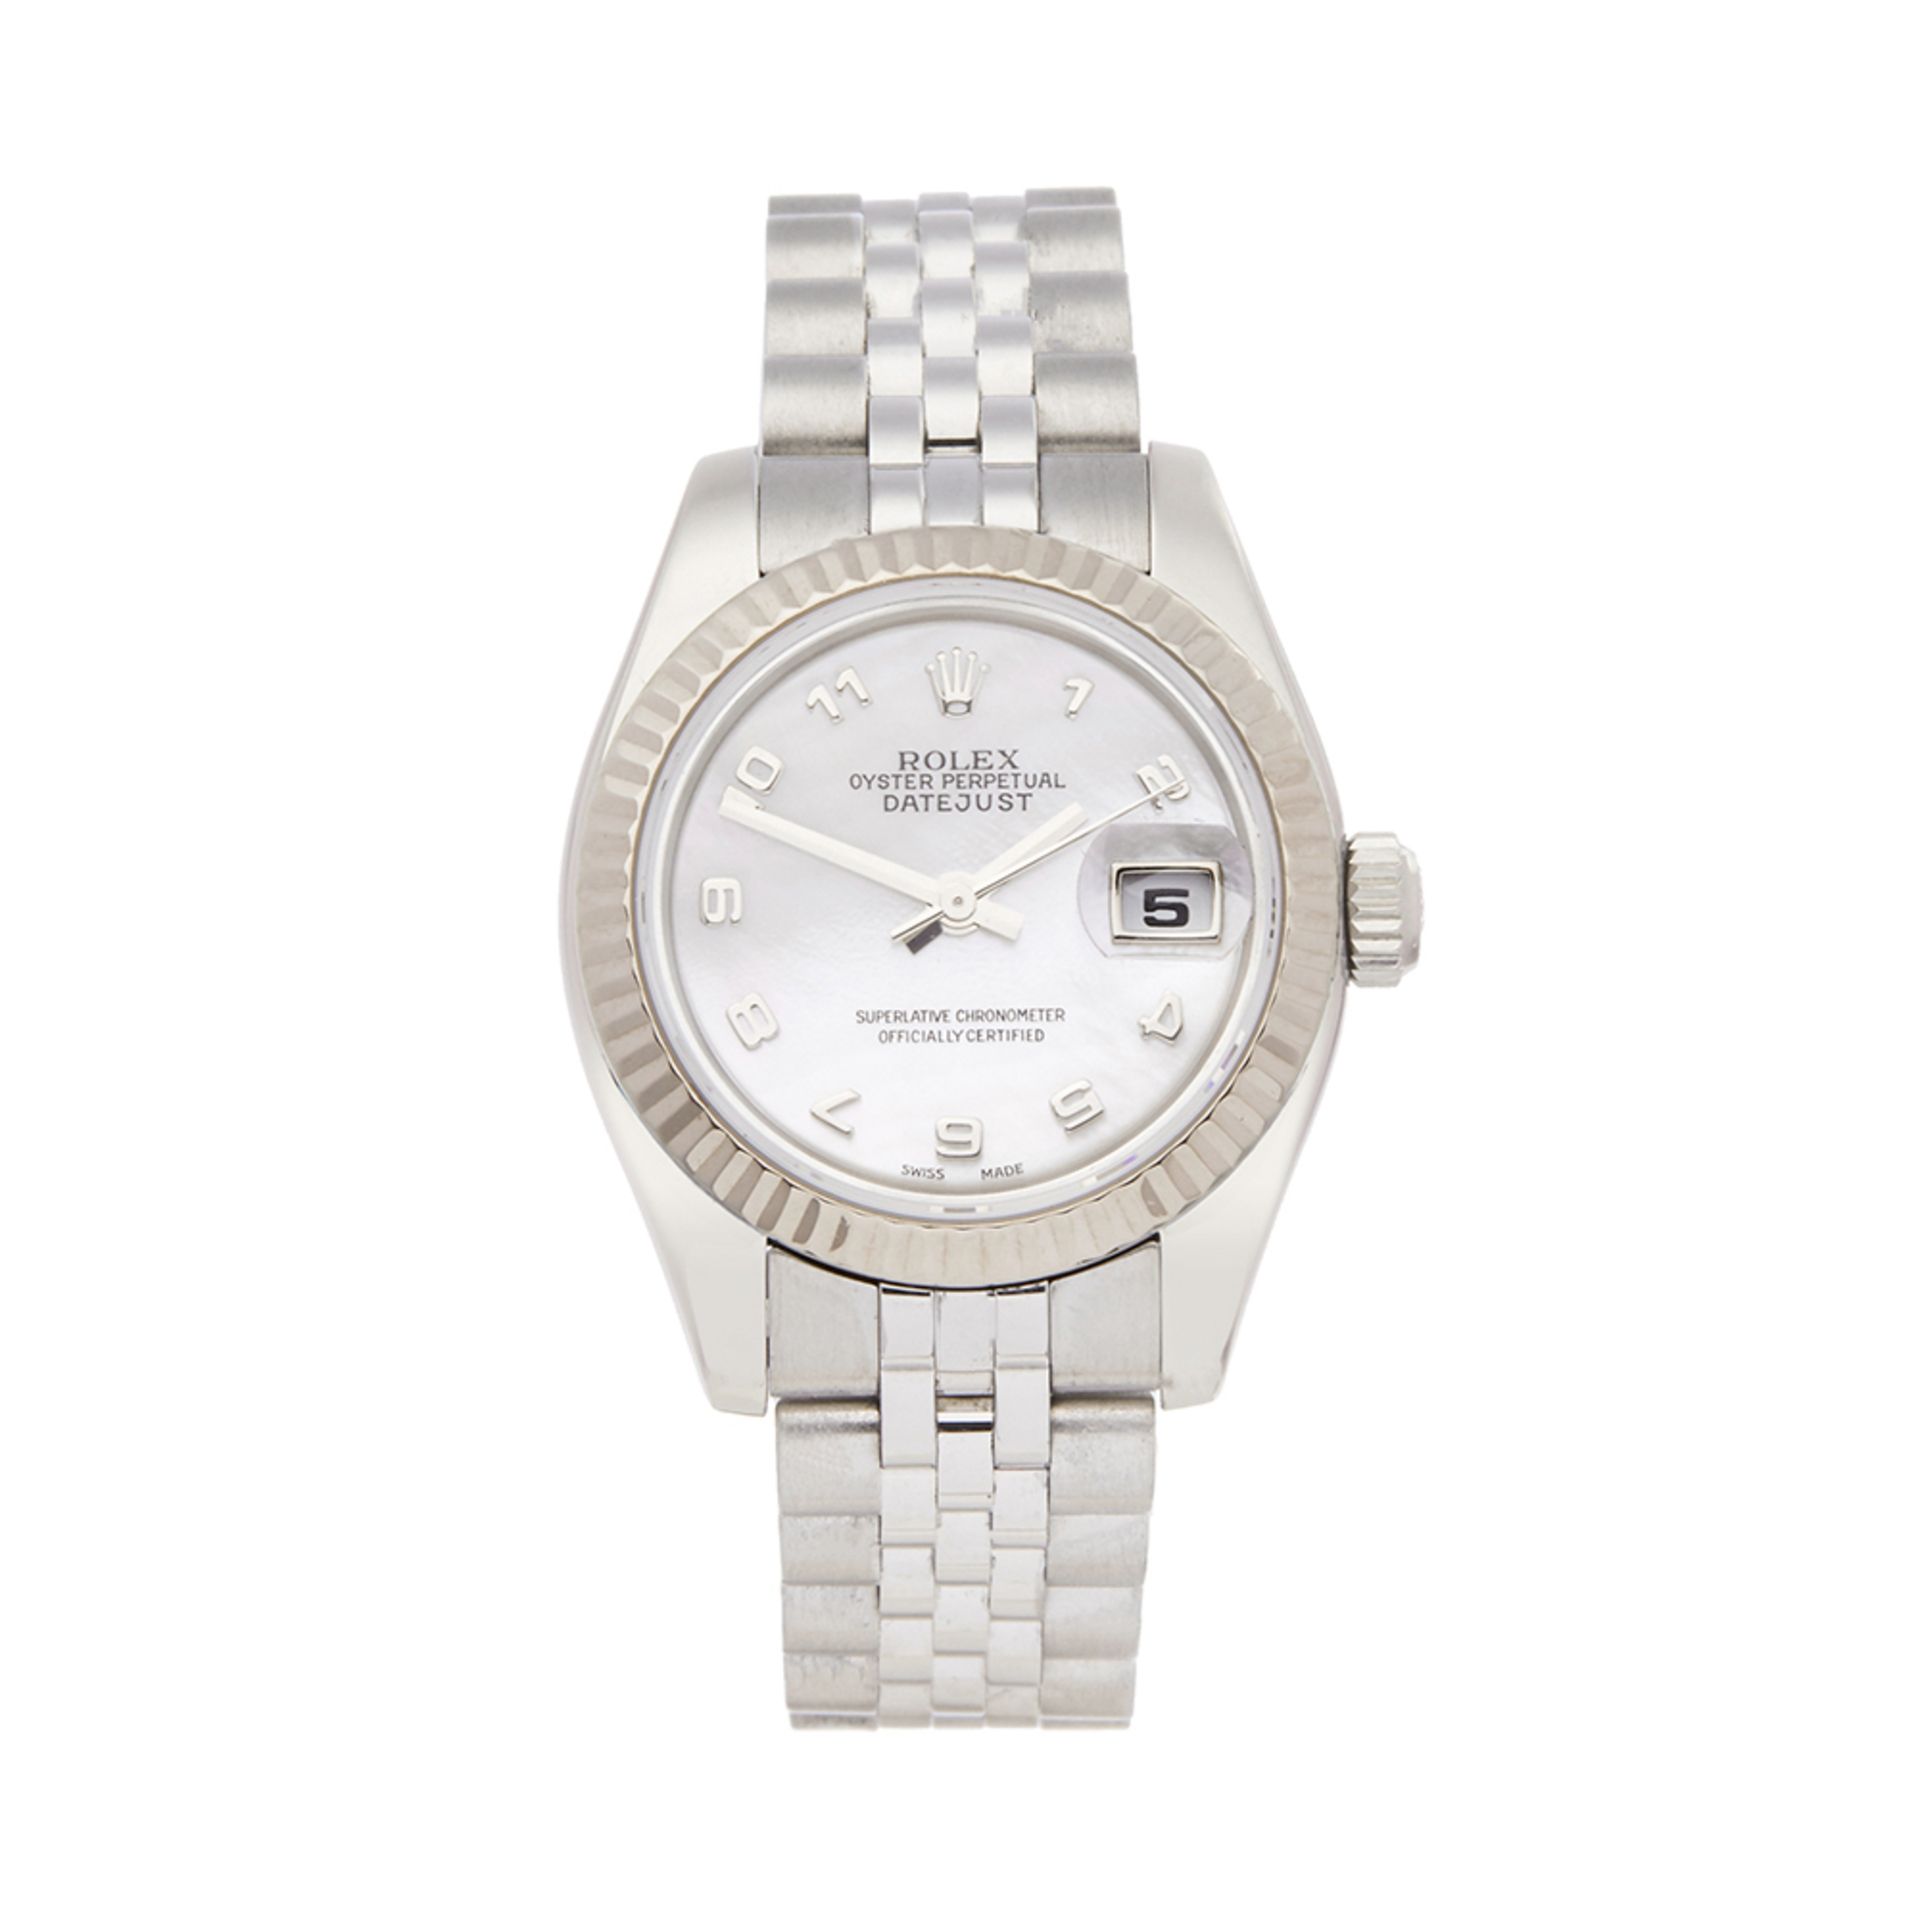 2006 Rolex DateJust 26 Mother of Pearl Stainless Steel - 179174 - Image 6 of 6